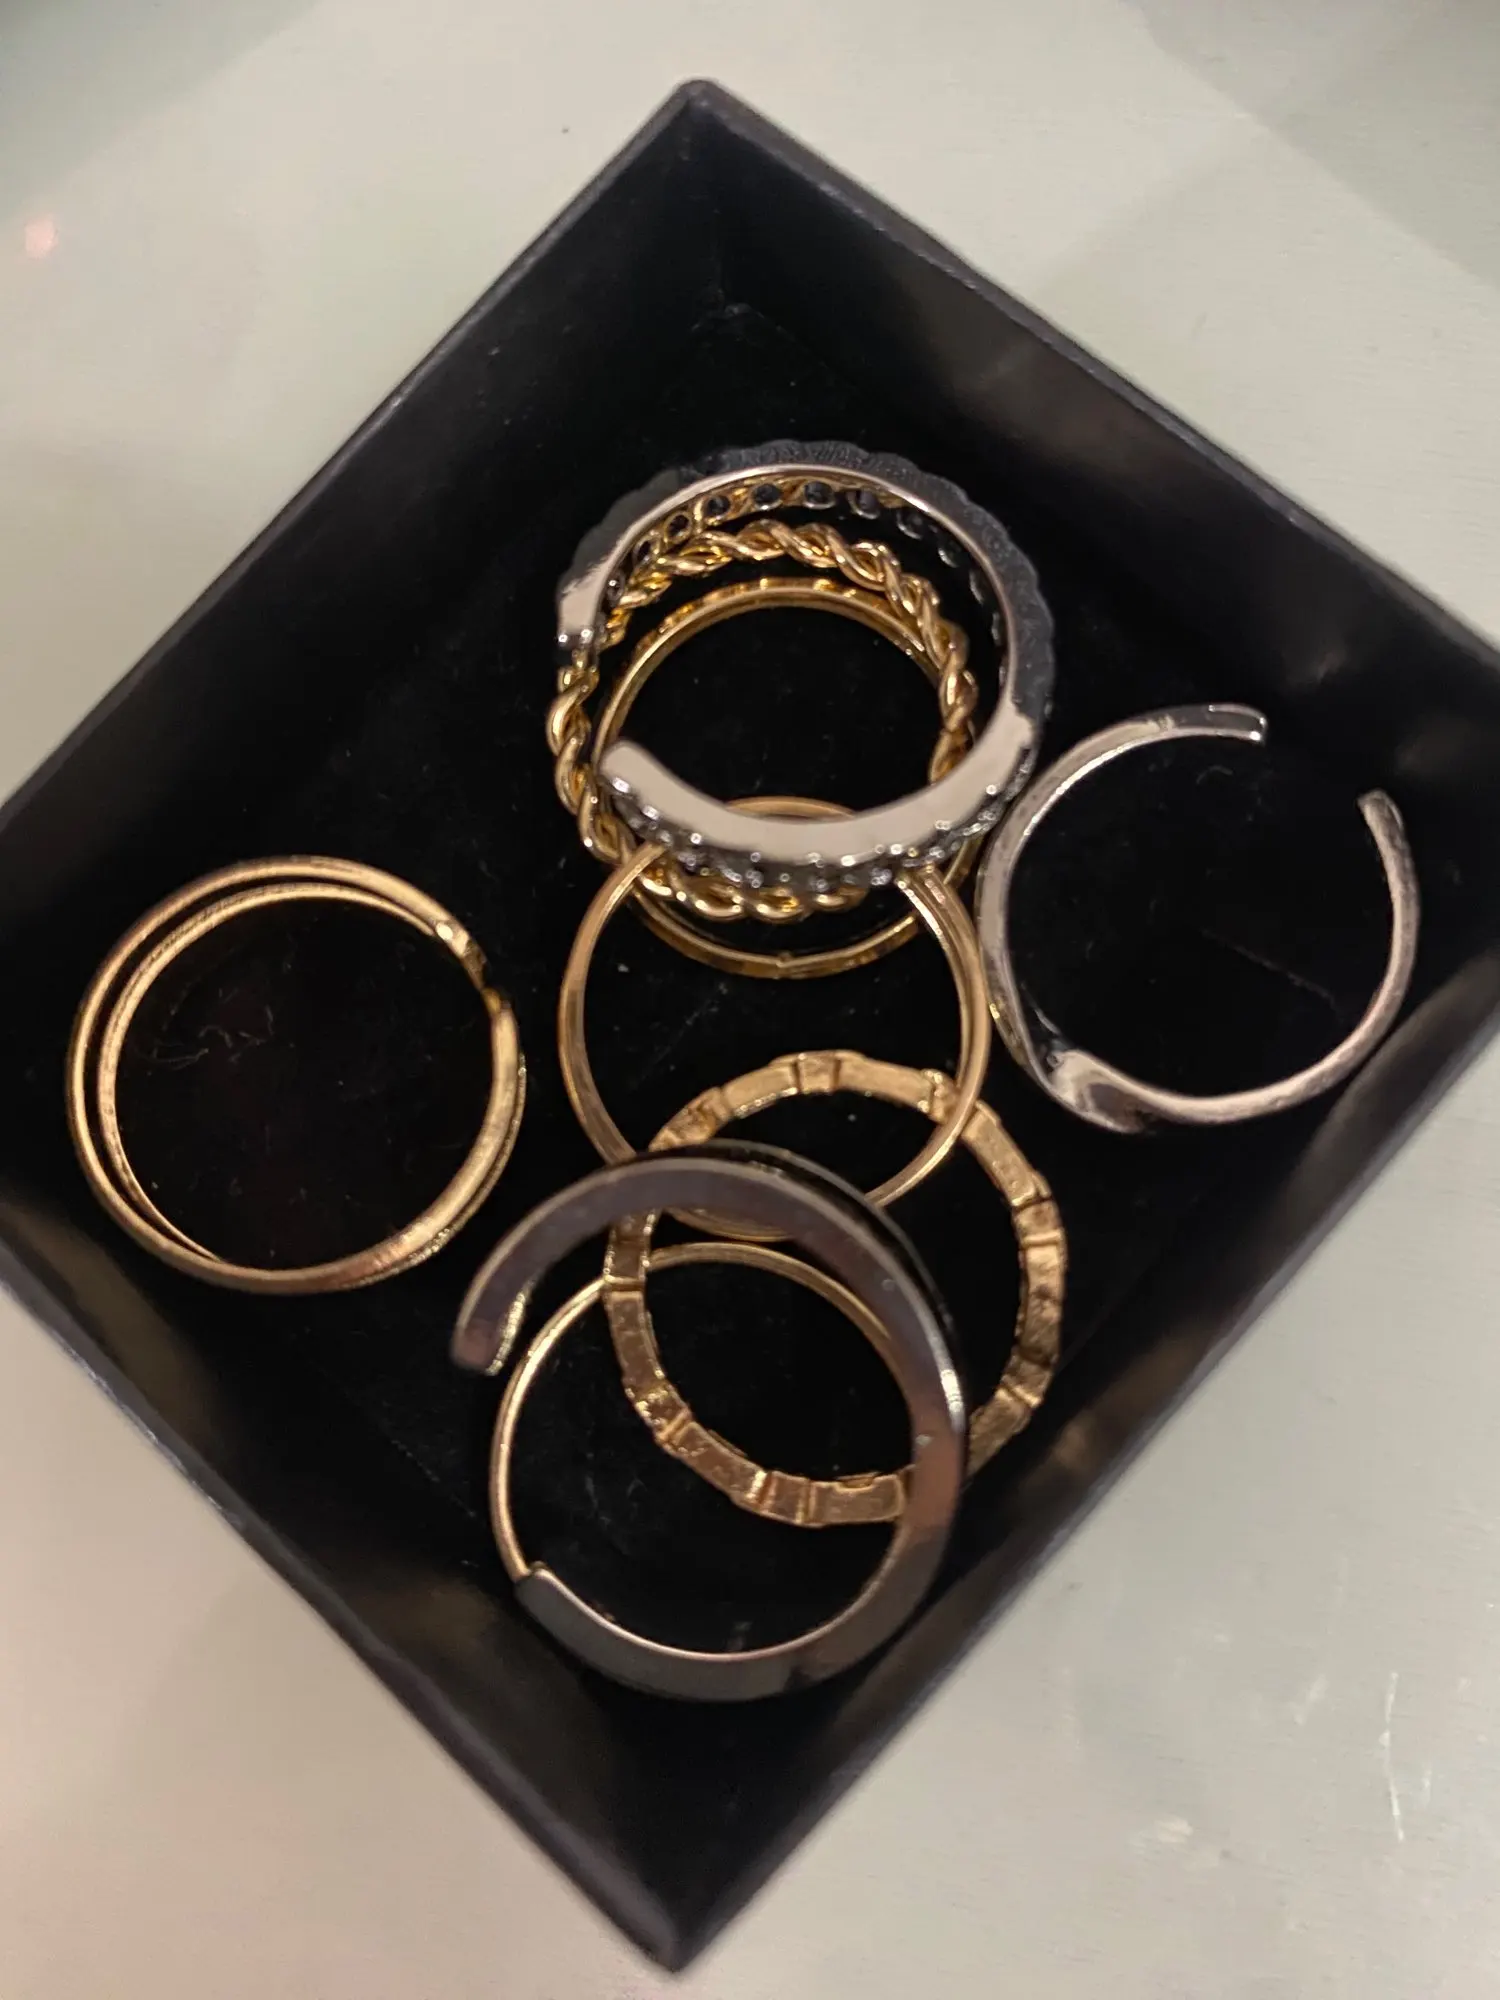 7pcs Fashion Jewelry Rings Set Hot Selling Metal Hollow Round Opening Women Finger Ring for Girl Lady Party Wedding Gifts photo review